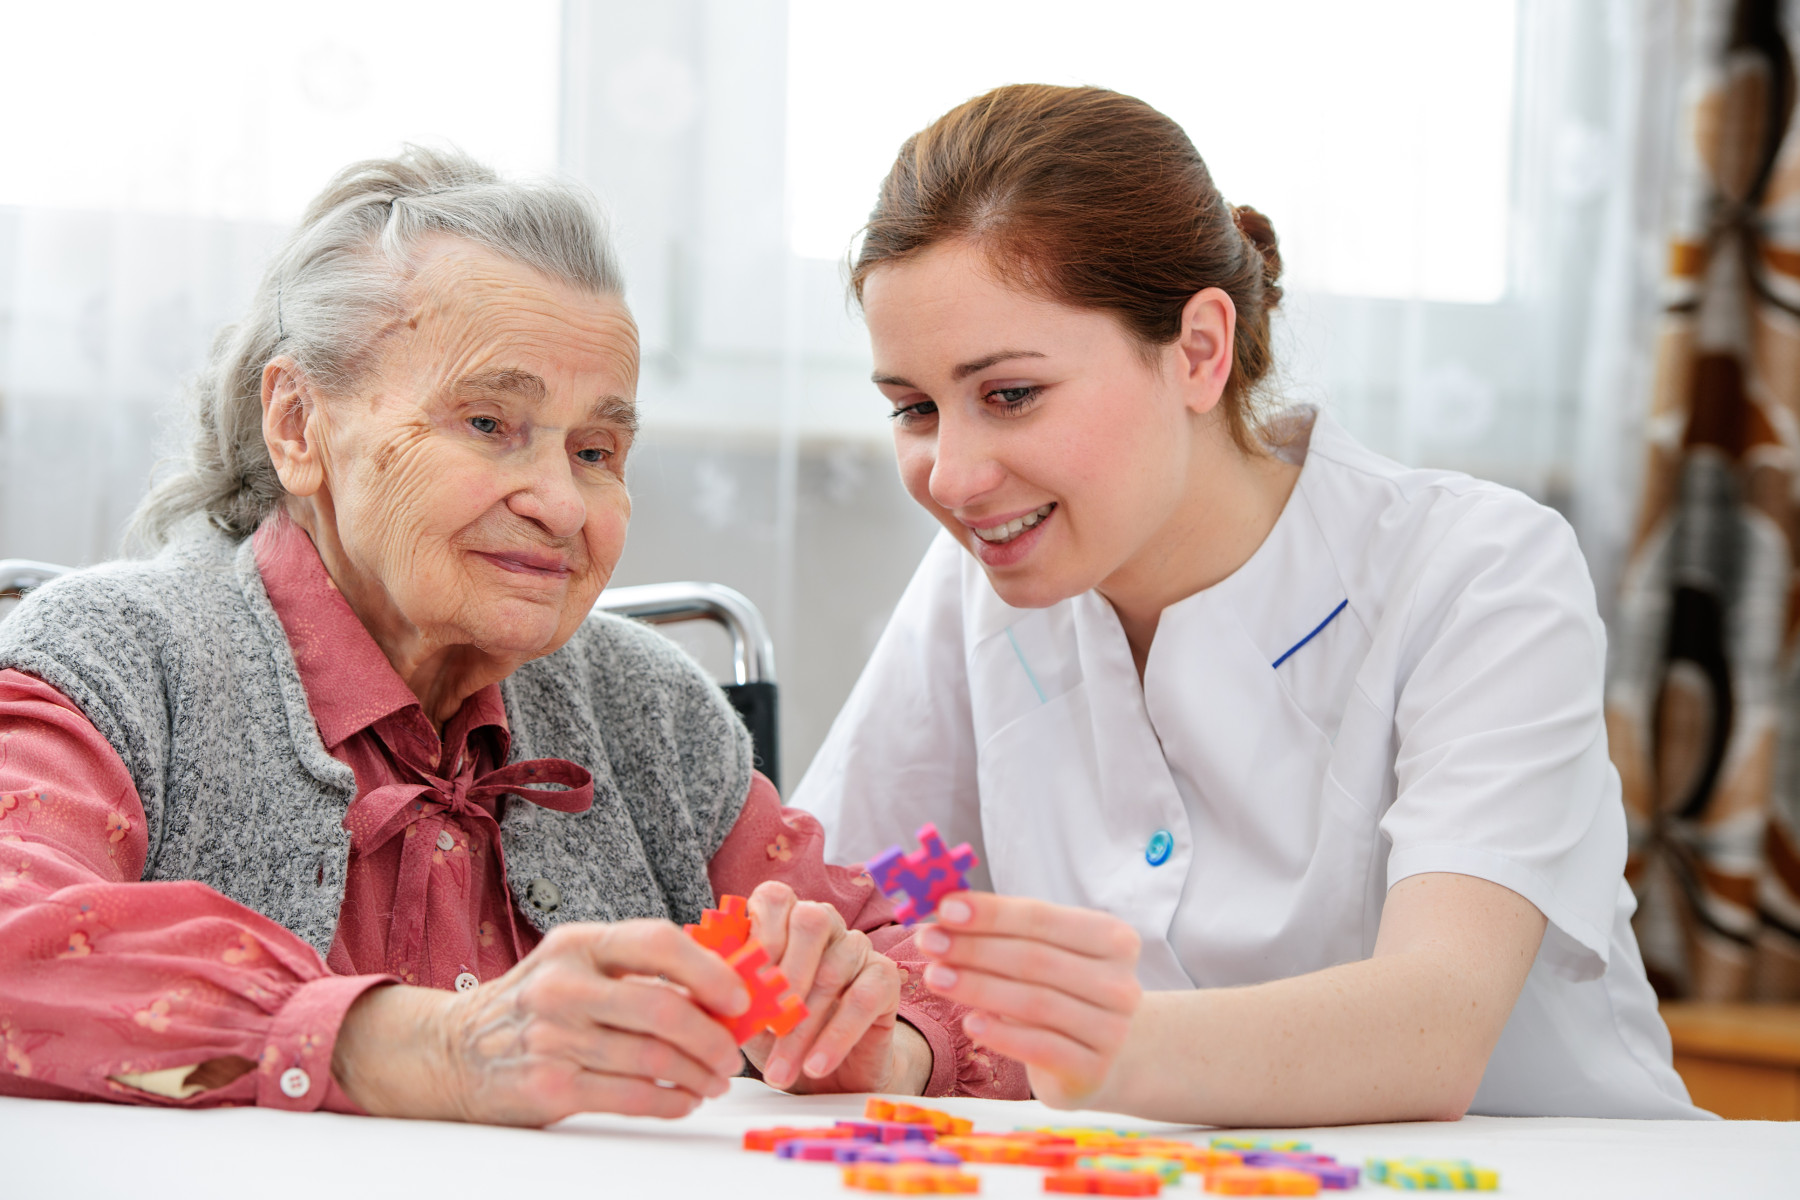 An elderly woman receiving engaging care with a puzzle activity with a care worker, exemplifying the supportive companionship aspect of respite care.